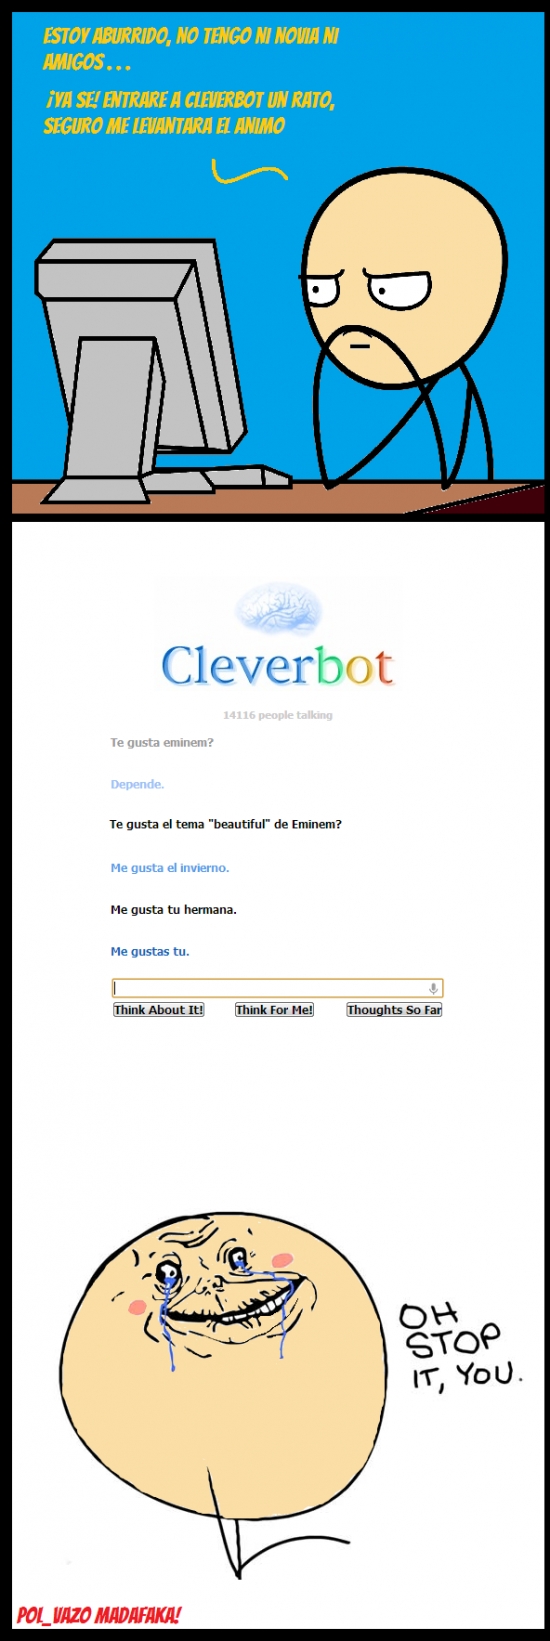 cleverbot,computer guy,forever alone,oh stop it you